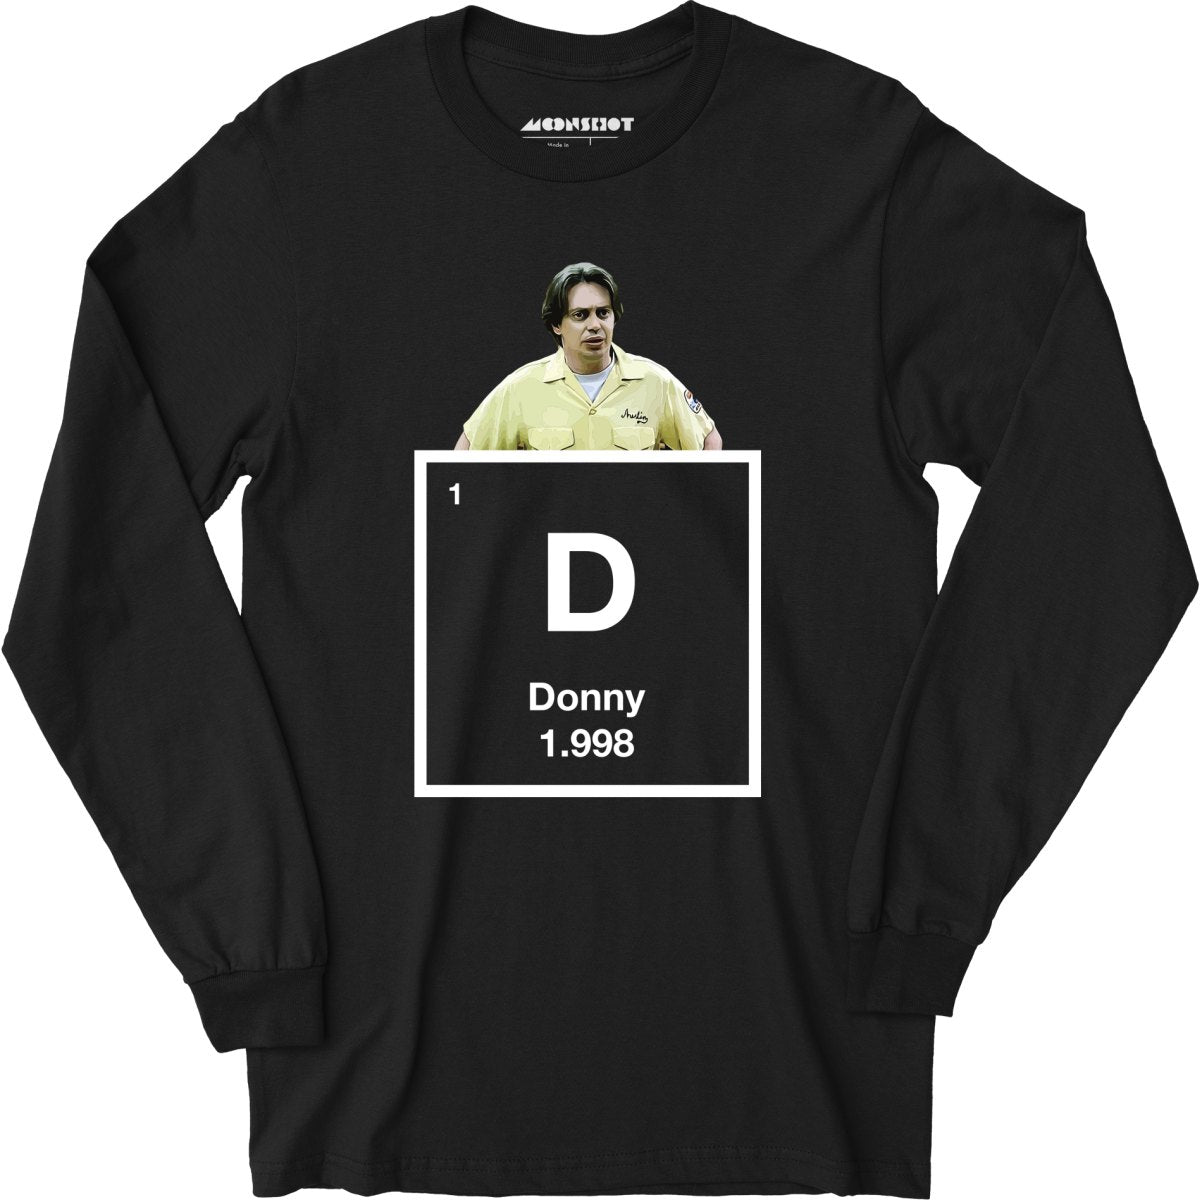 Donny Out of His Element - Big Lebowski - Long Sleeve T-Shirt